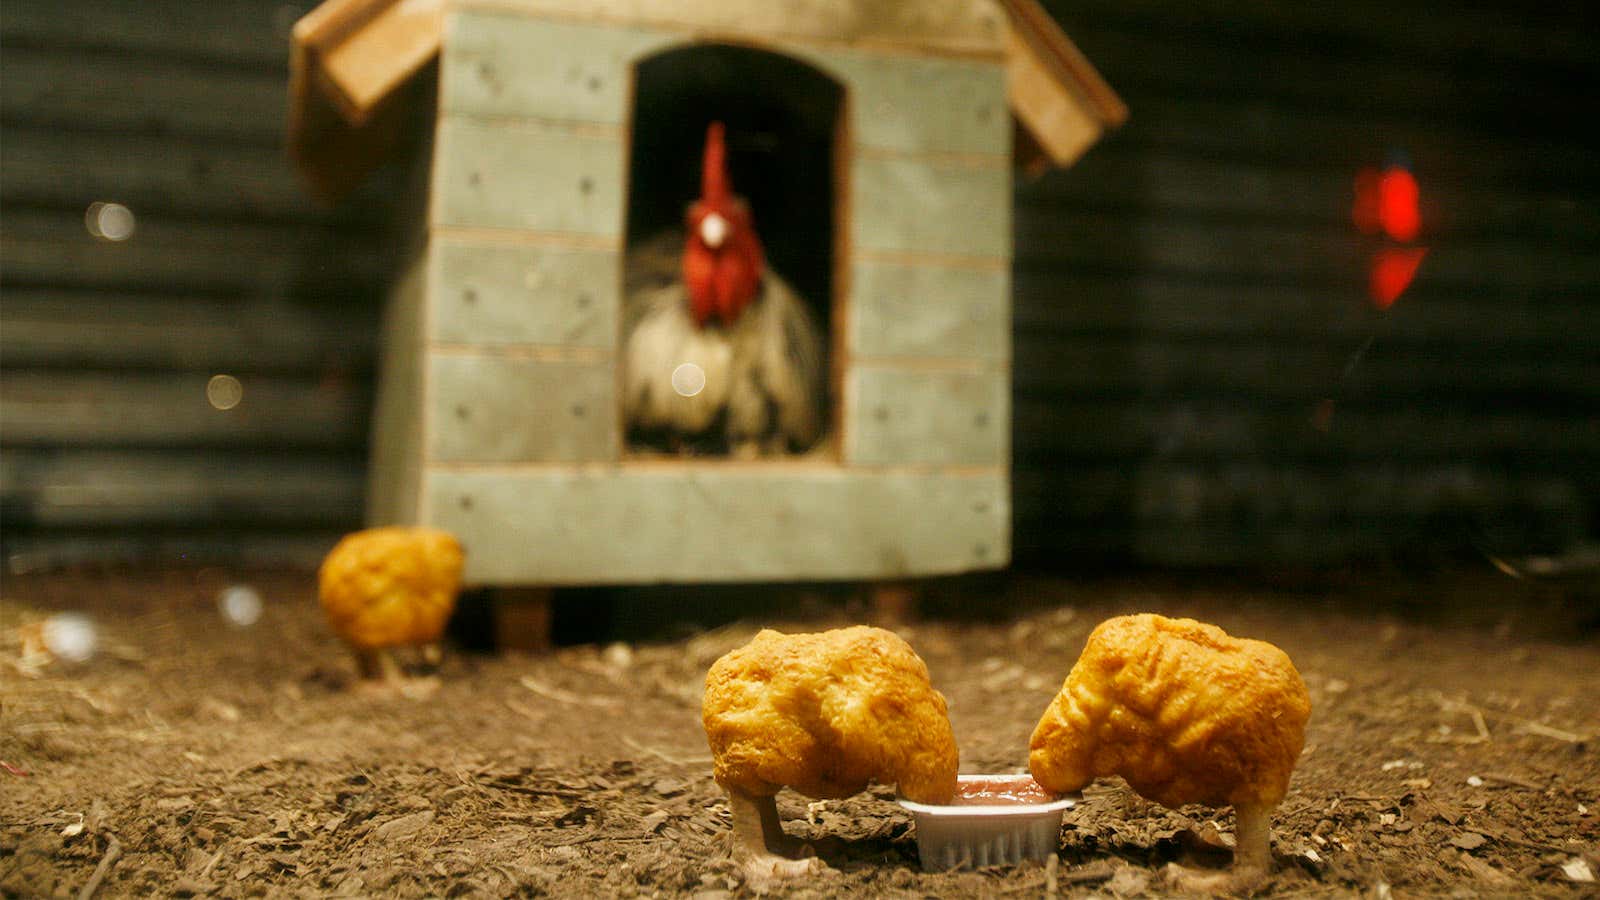 The chicken coop of the future.